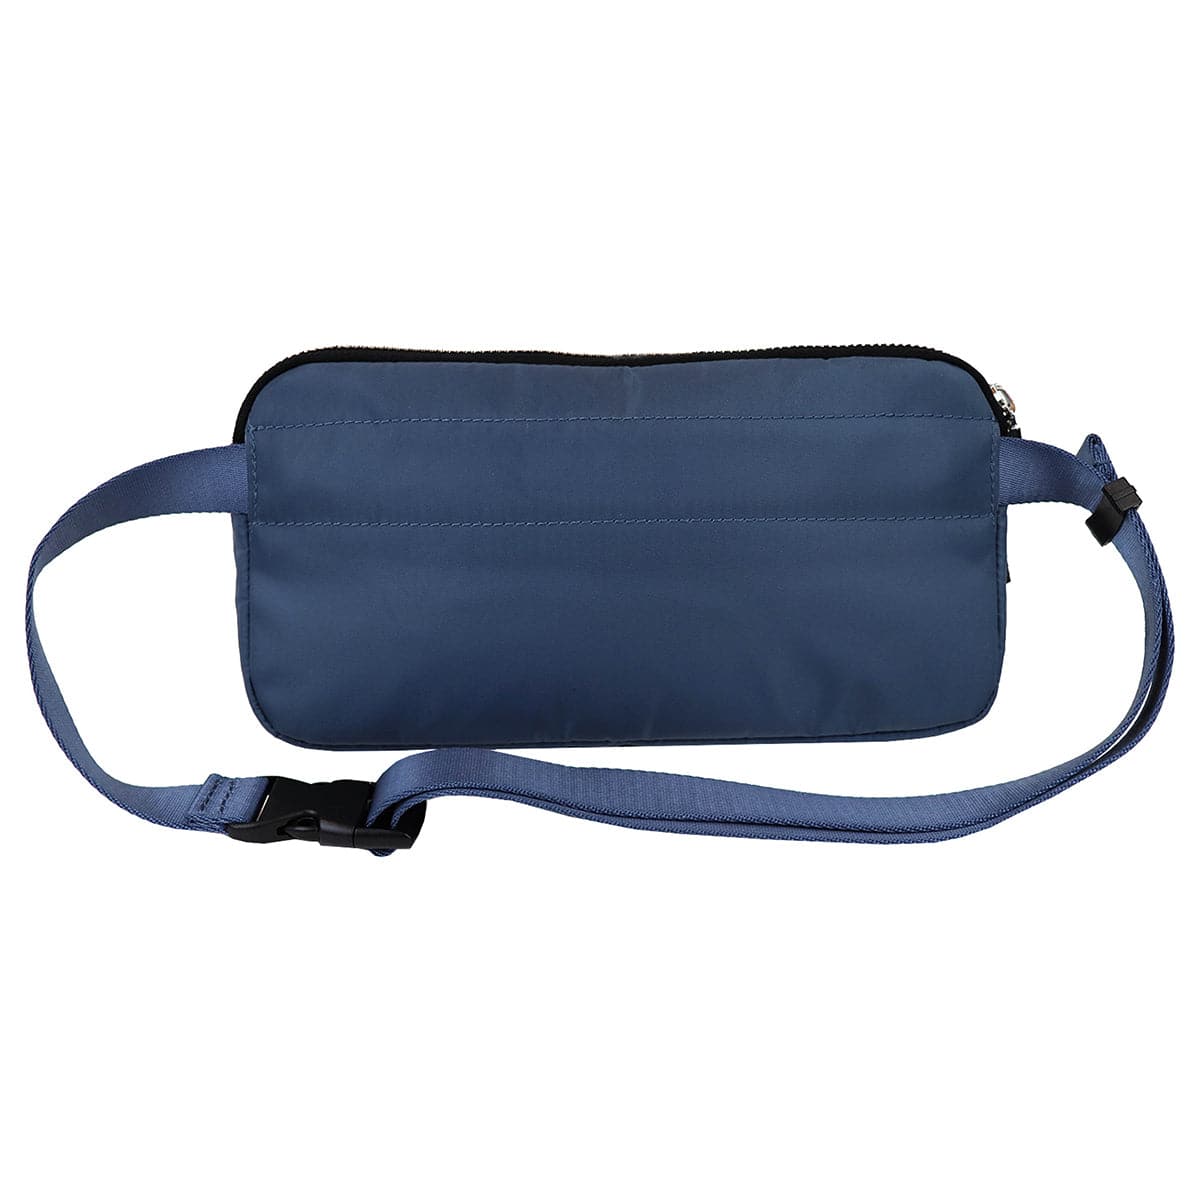 Hedgren Marcia Sustainably Made 2 in 1 Crossbody Bag